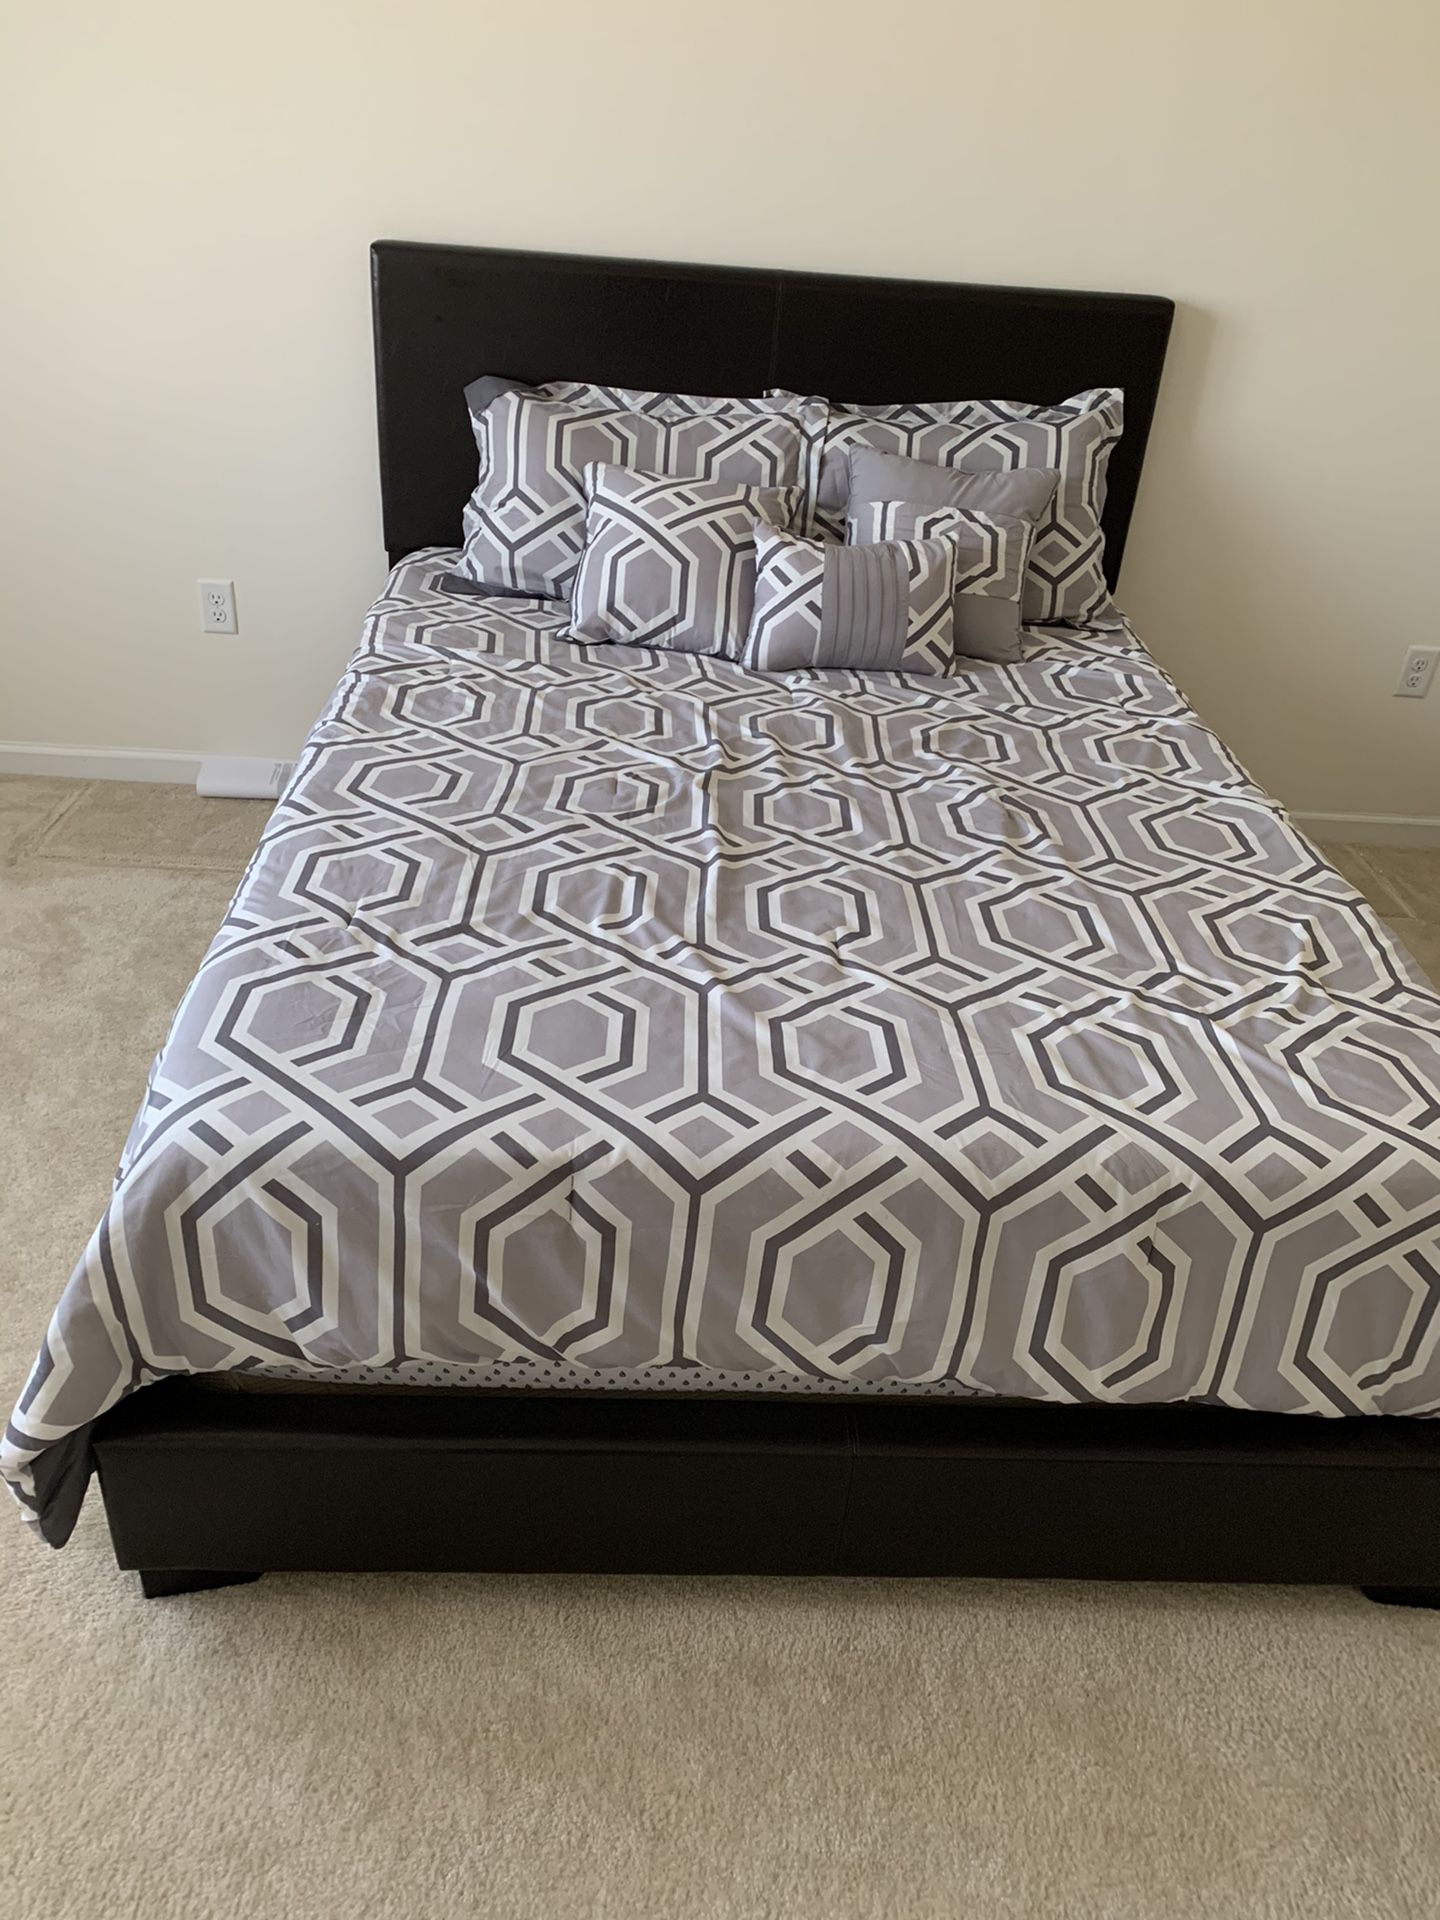 Queen bed frame with pillow top mattress and box spring. Bedroom.